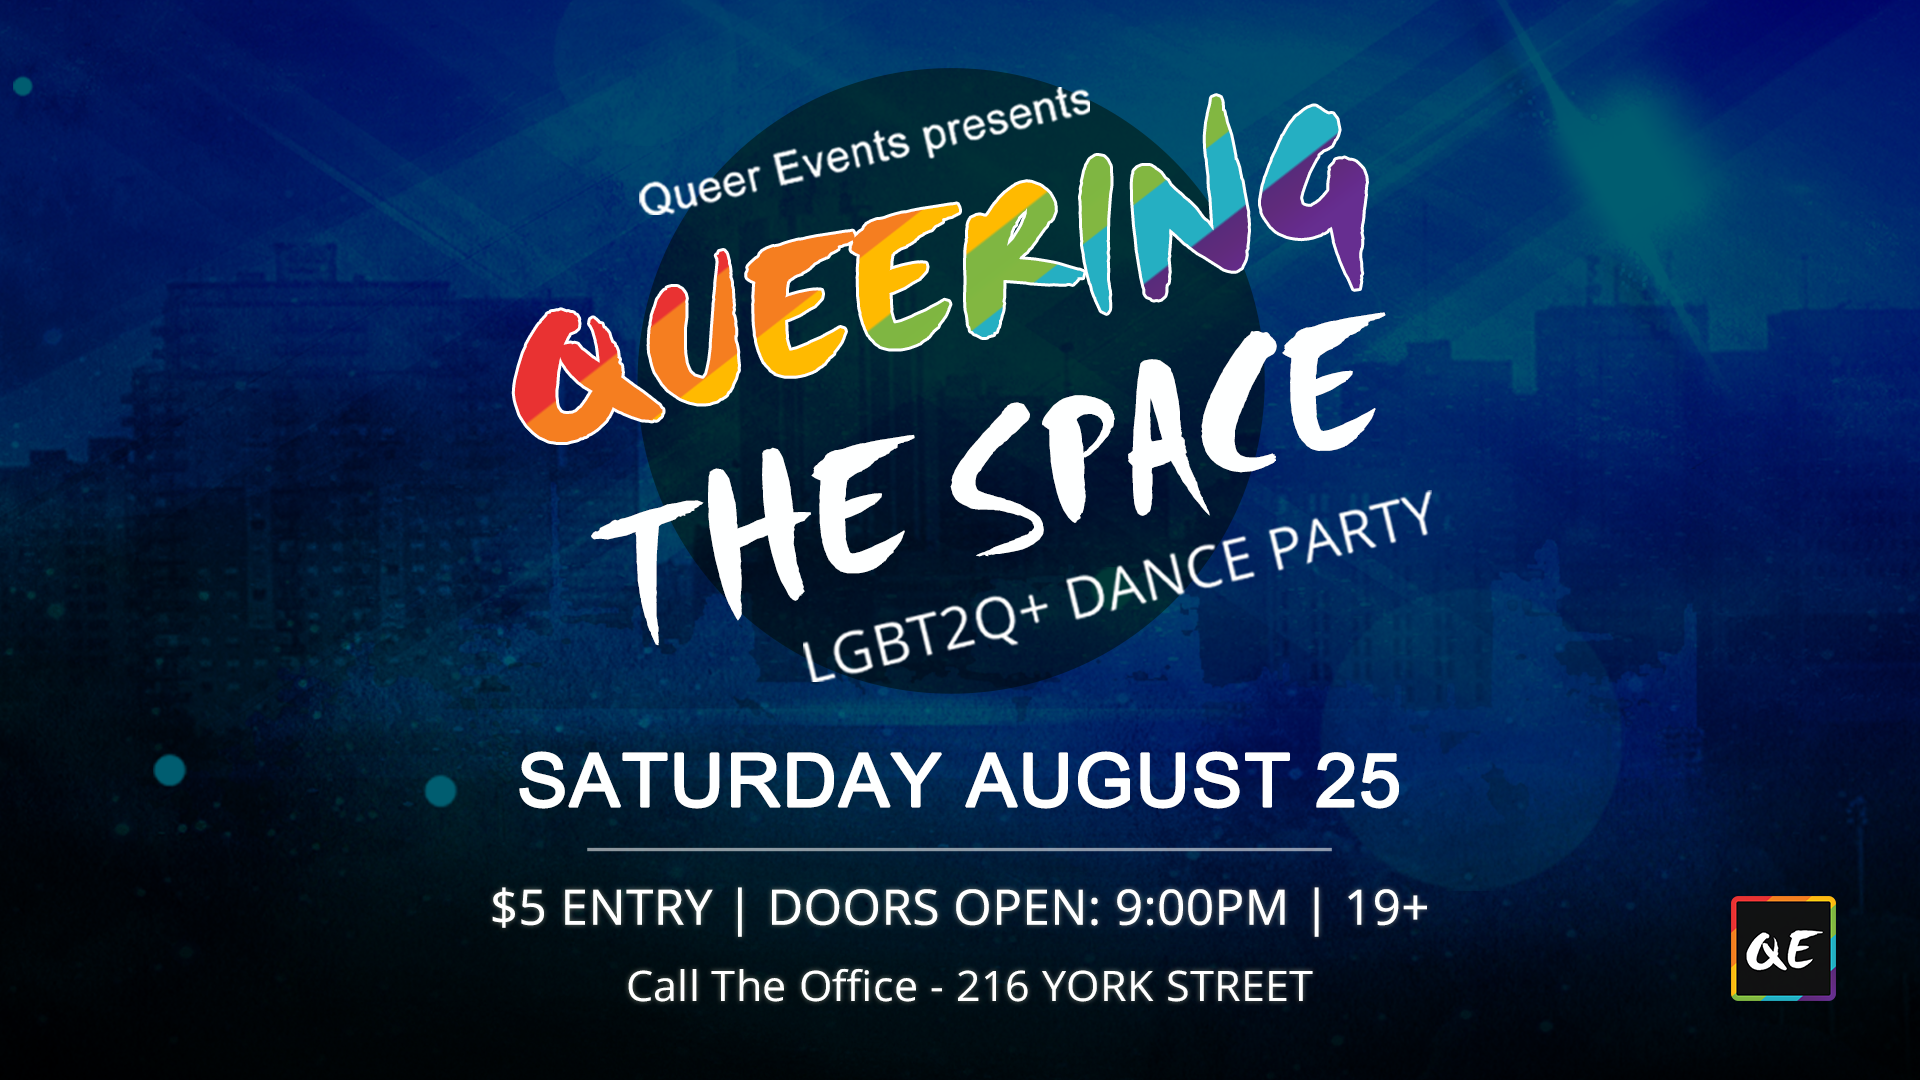 Queer Events Presents Queering the Space